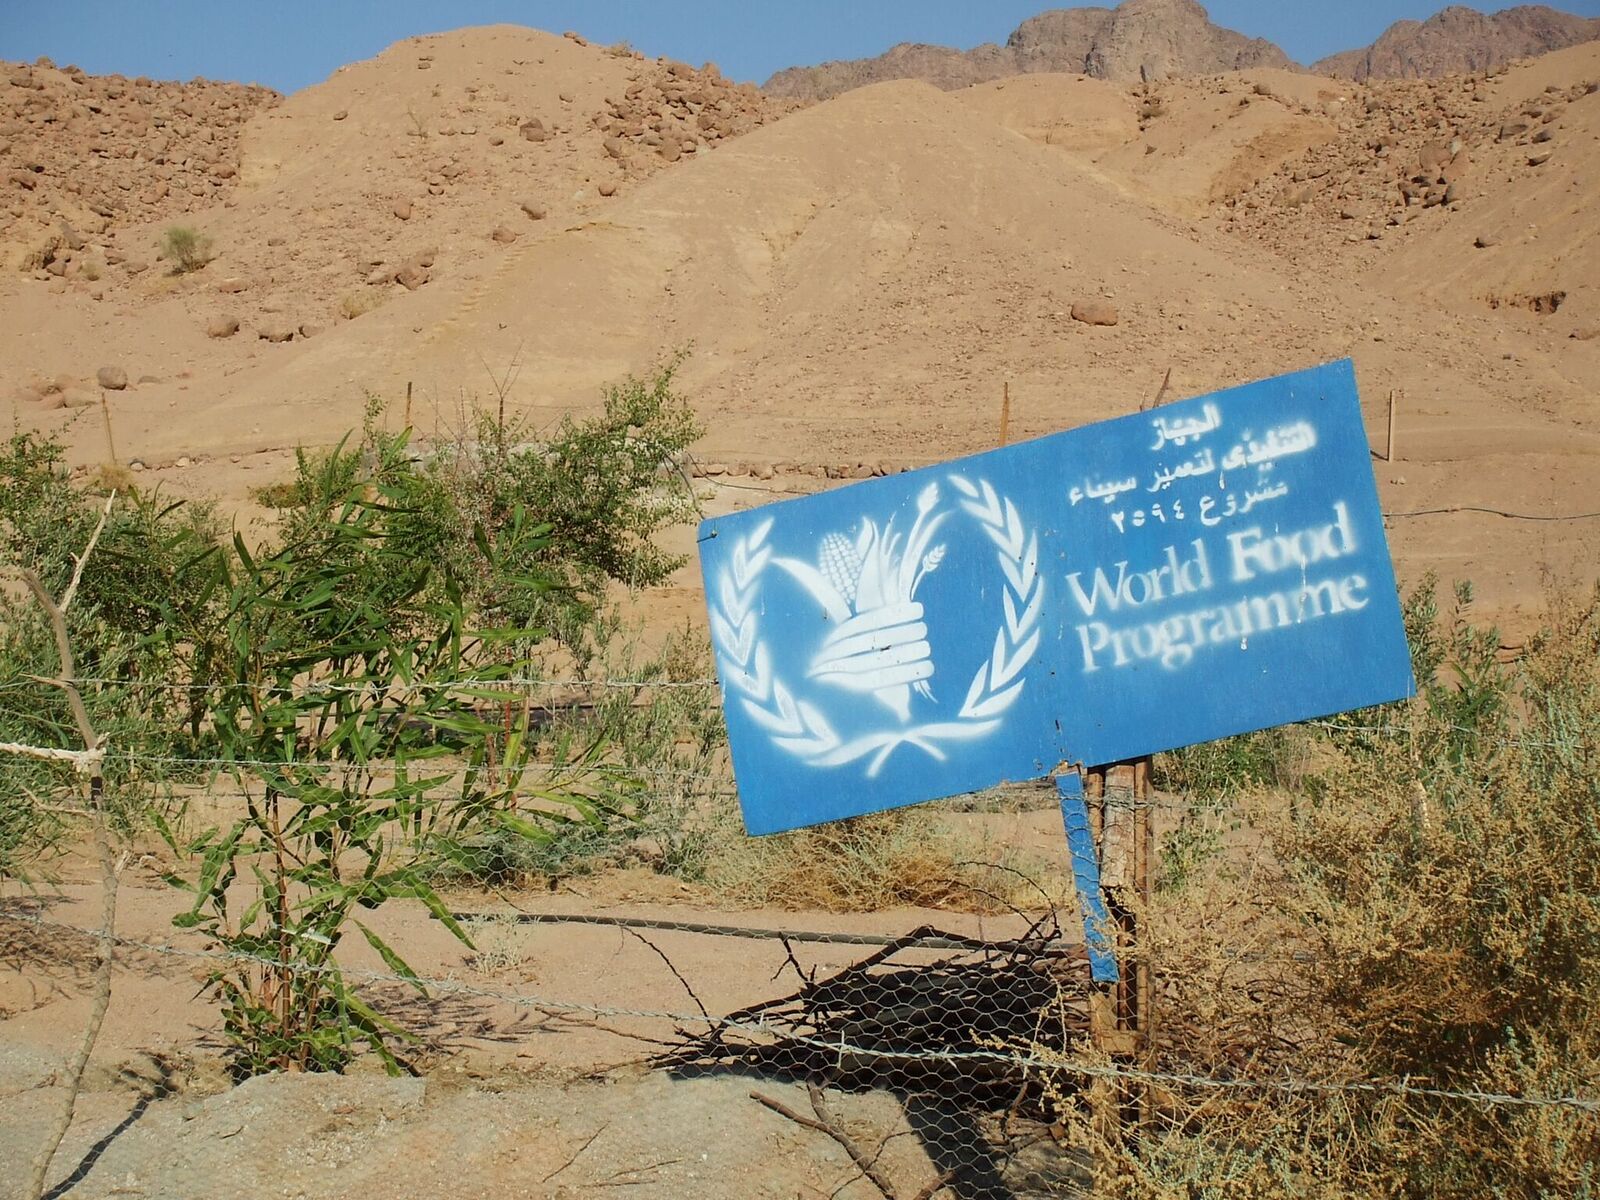 A Bedouin garden sponsored by the WFP. Project funds bring short-term relief but Bedu need lasting change